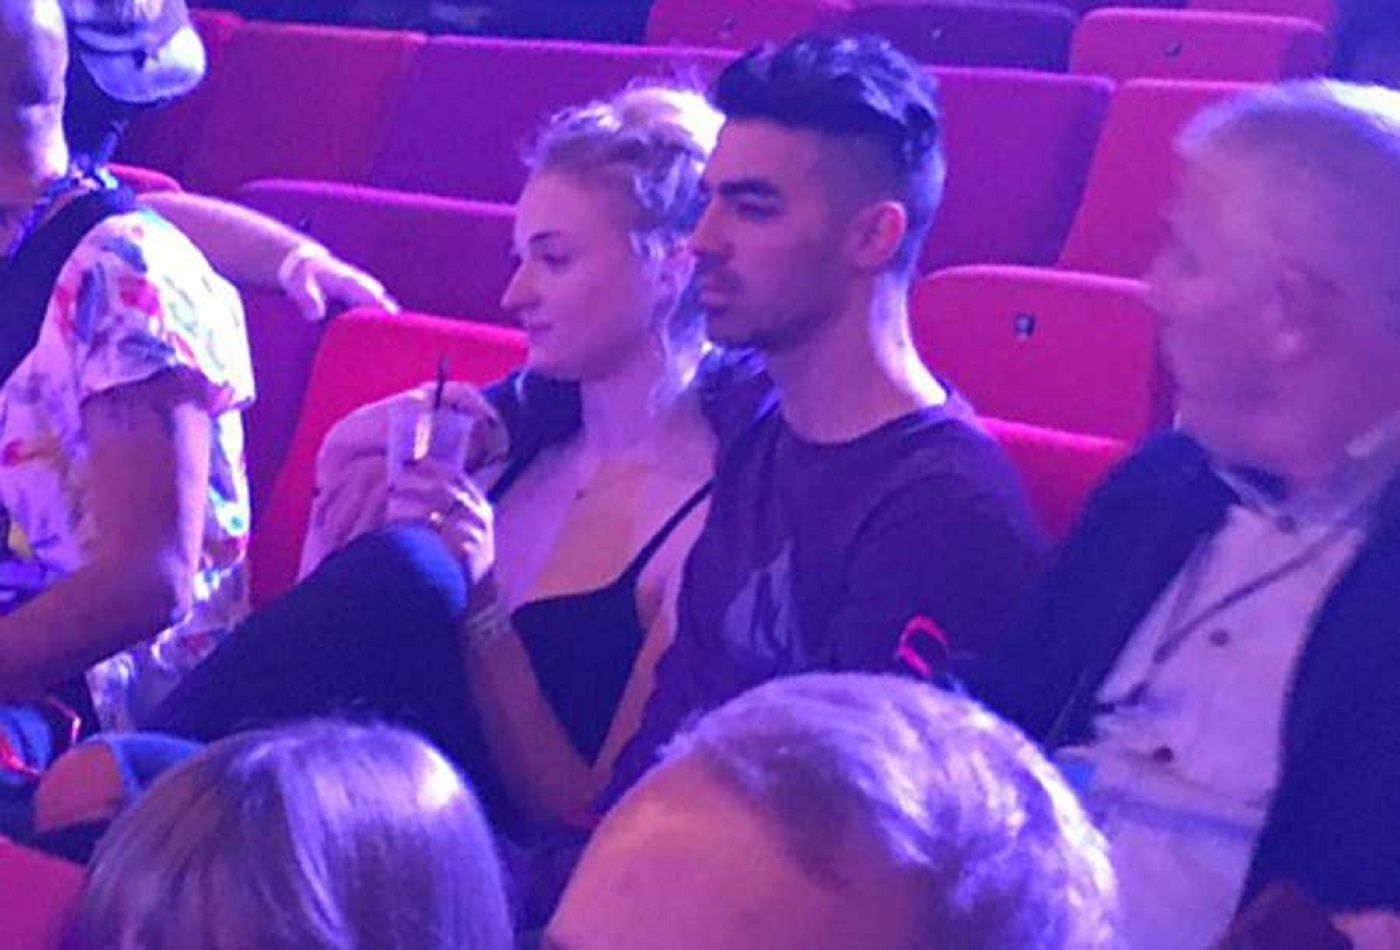 Concert 15 Interesting Facts About Joe Jonas And Sophie Turner's Relationship